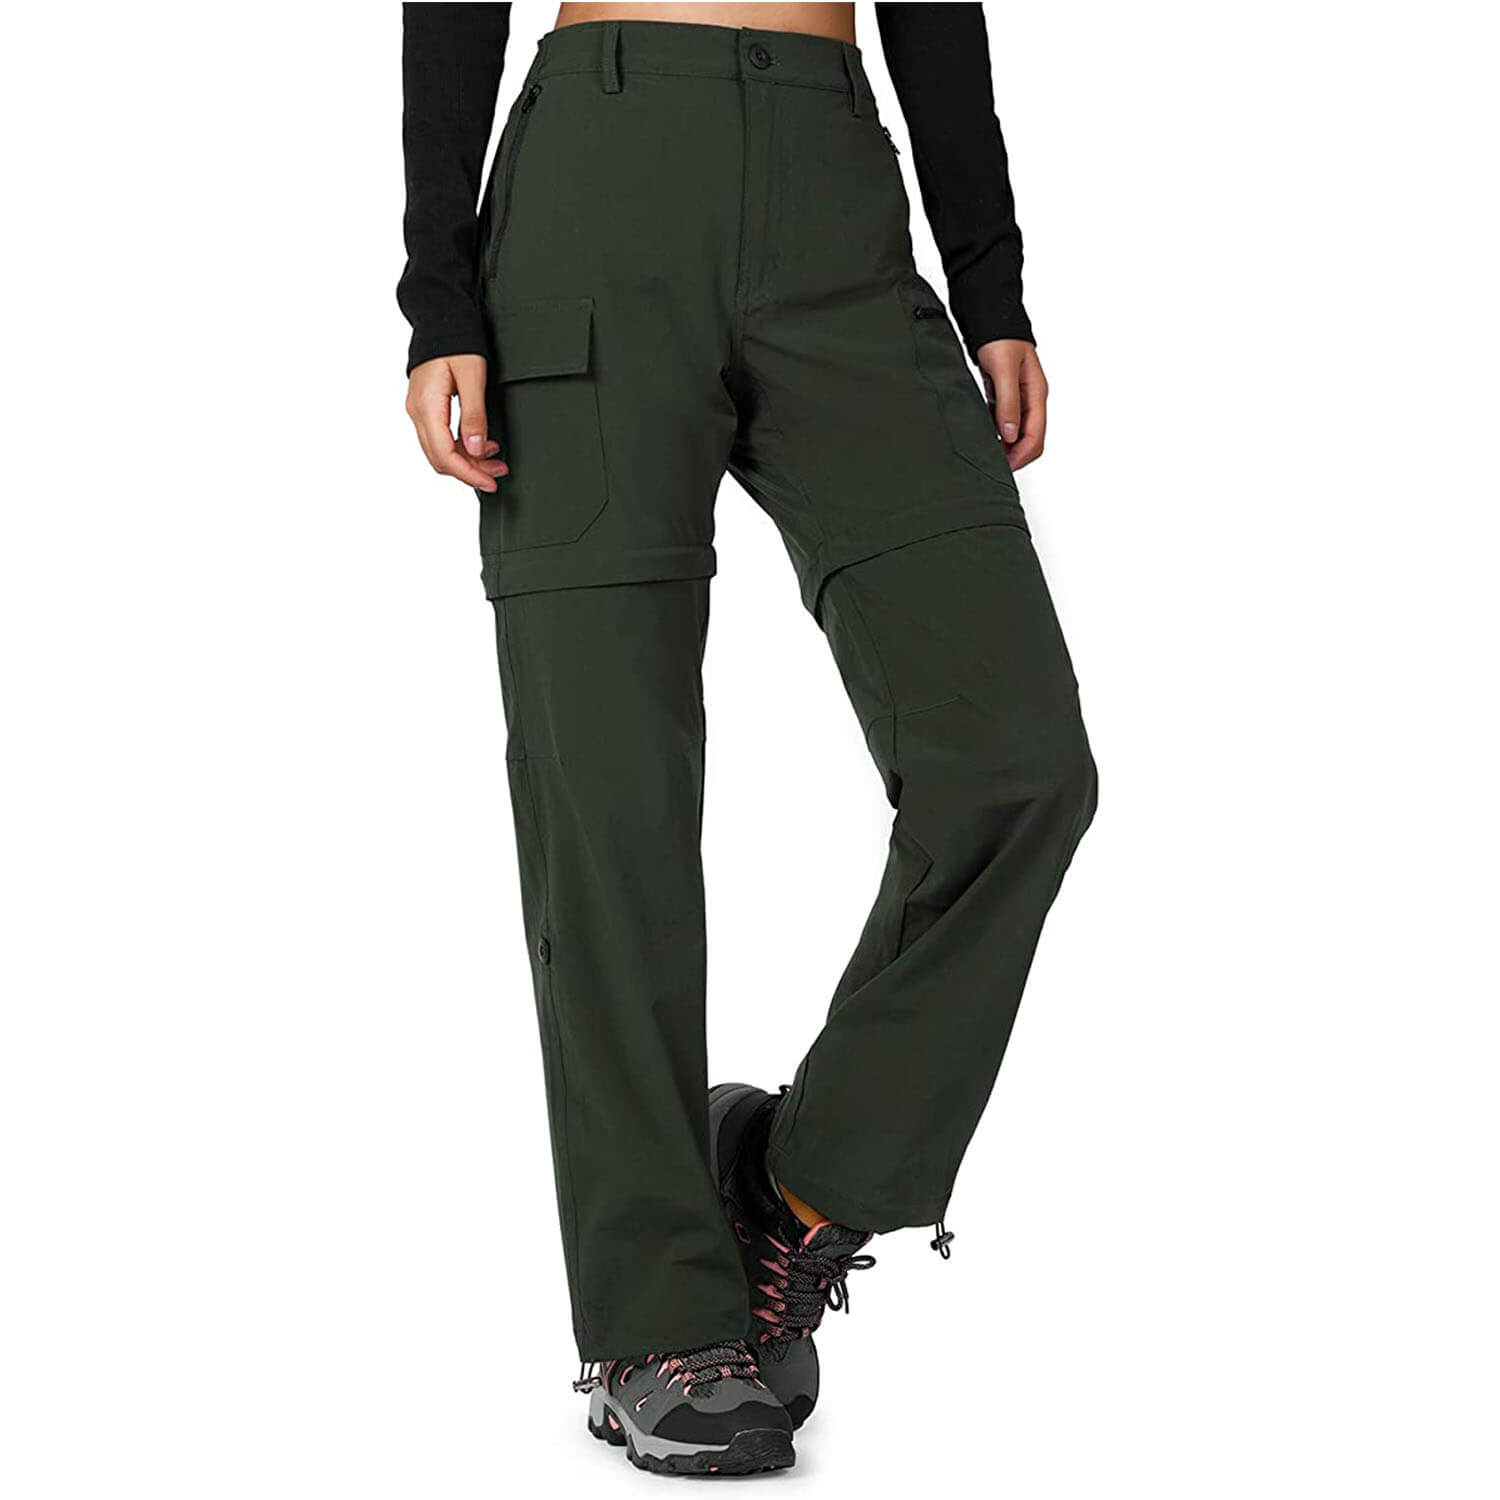 Cycorld Women's-Hiking-Pants-Convertible Quick-Dry-Stretch-Lightweight Zip-Off Outdoor Pants with 5 Deep Pocket